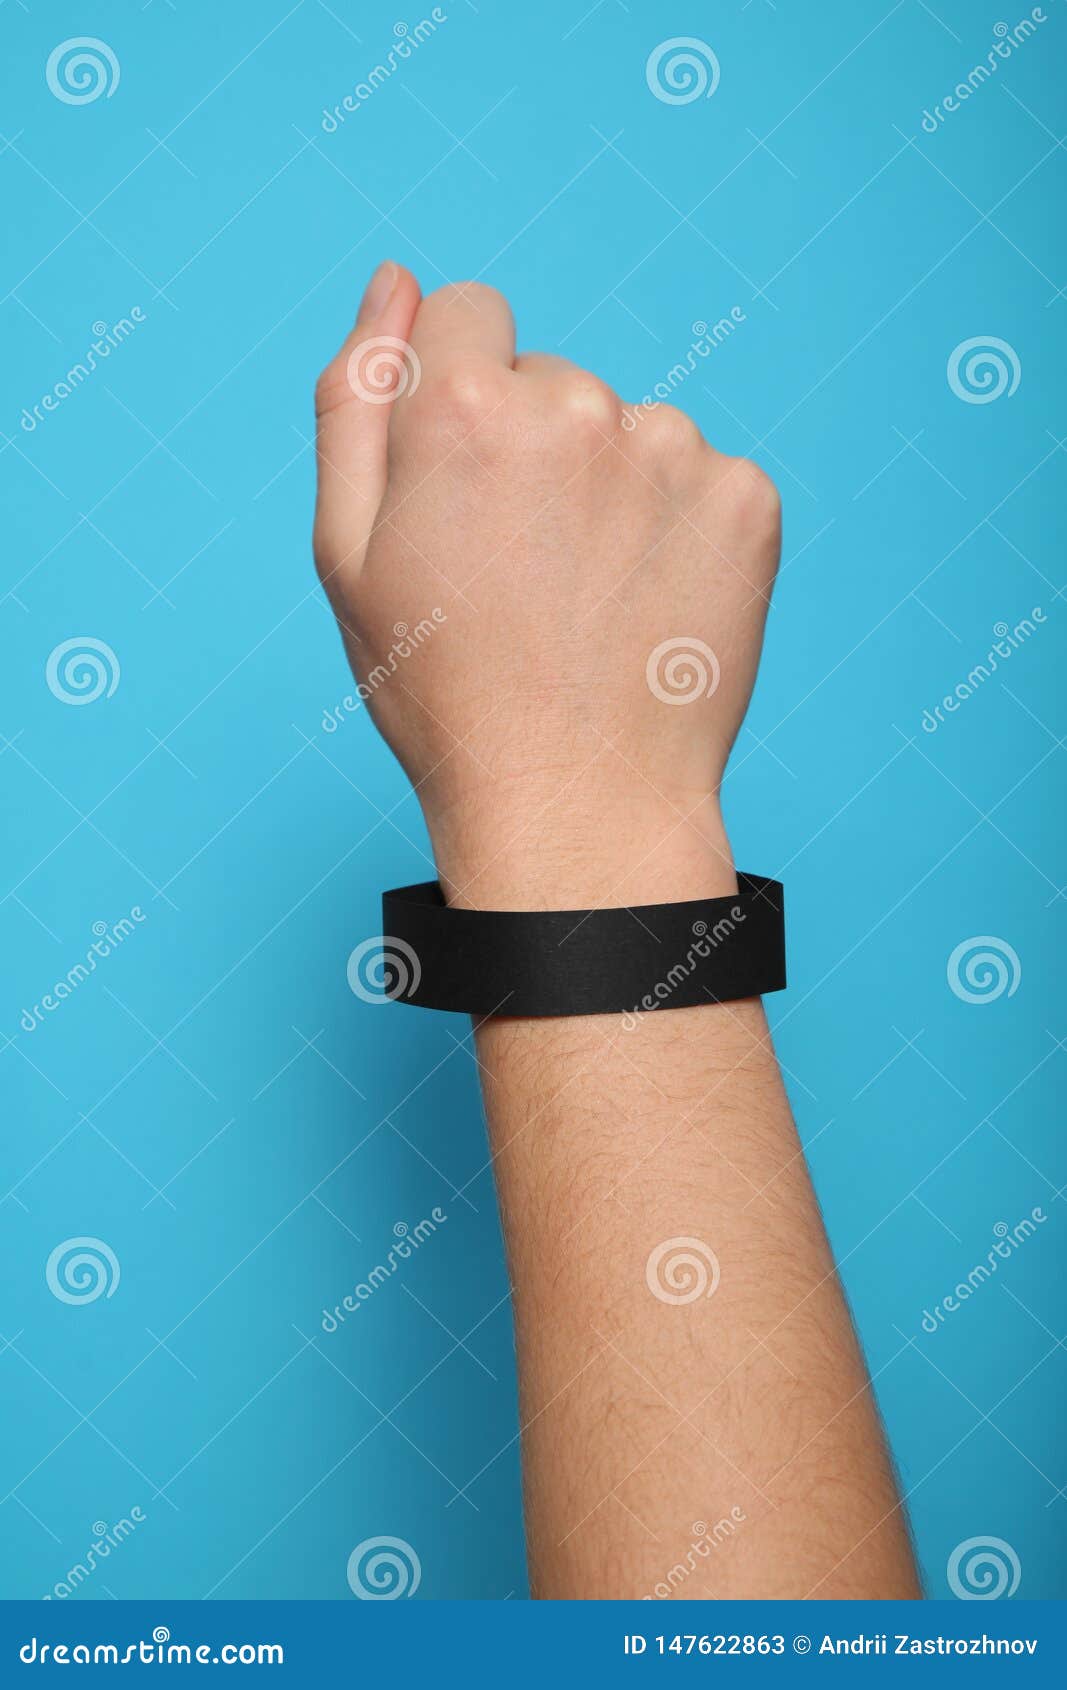 Download Black Blank Bracelet On Hand Music Festival Branding Wristband Adhesive Paper Accessory For Concert Event Mockup Stock Image Image Of Branding Crowd 147622863